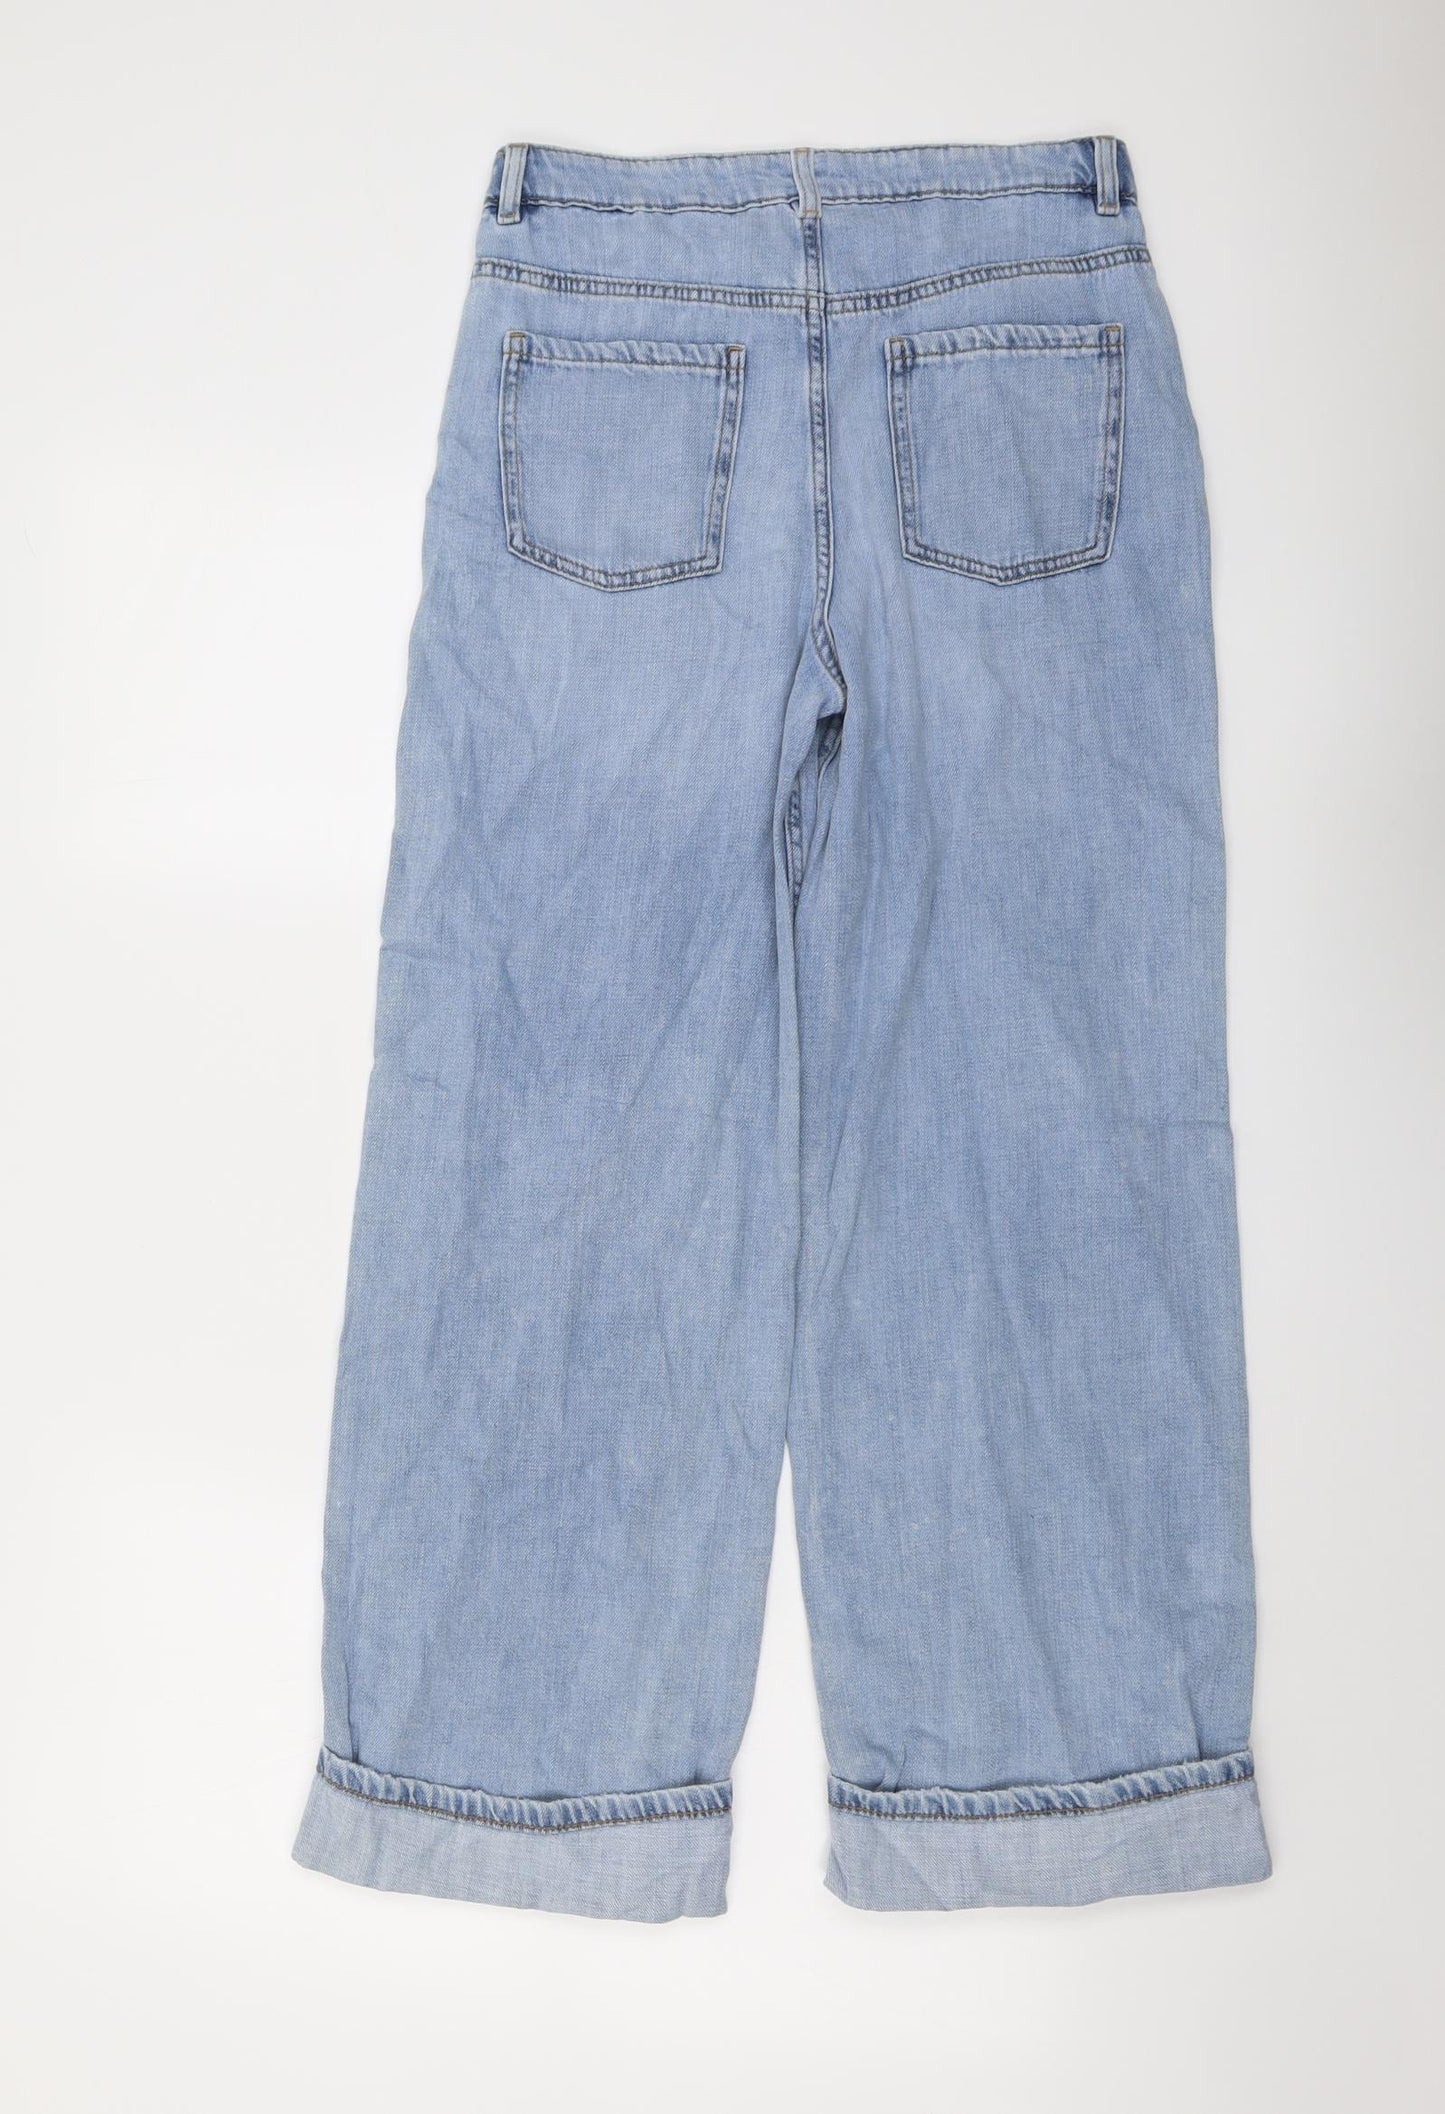 Marks and Spencer Girls Blue Cotton Wide-Leg Jeans Size 12-13 Years Regular Button - Distressed